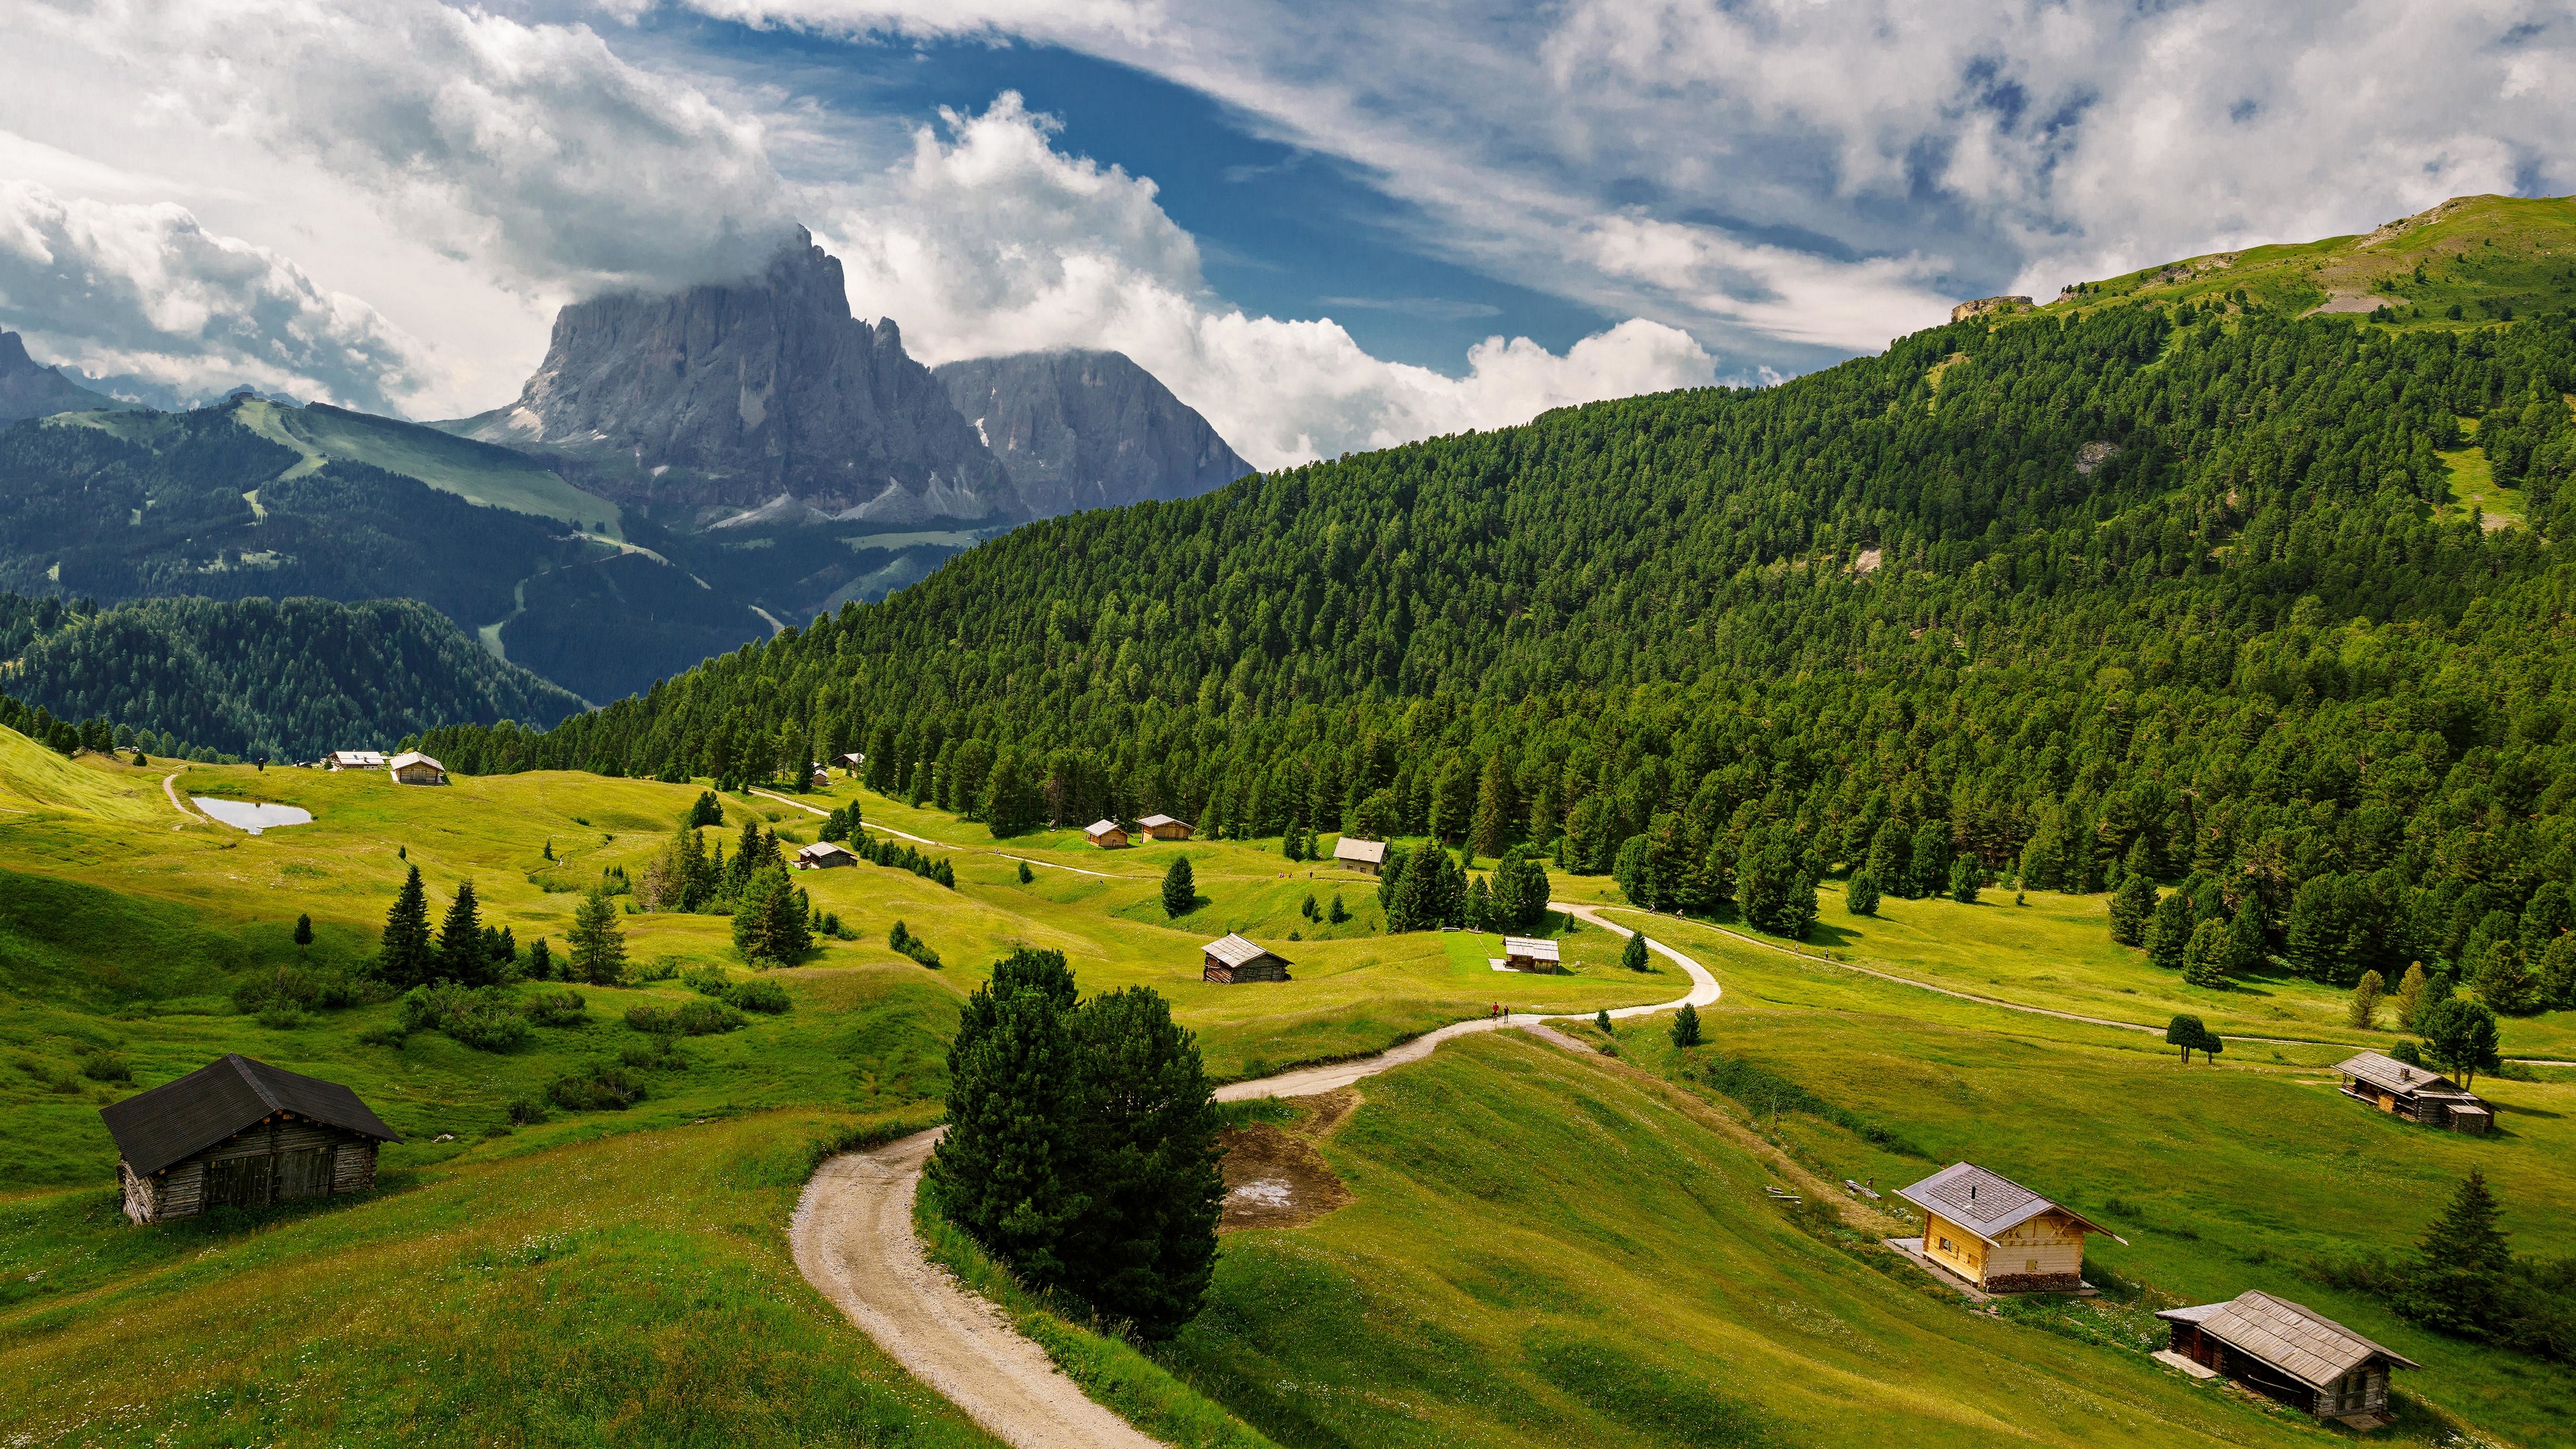 General 3840x2160 Italy nature landscape field house forest mountains sky clouds dirt road Dolomites